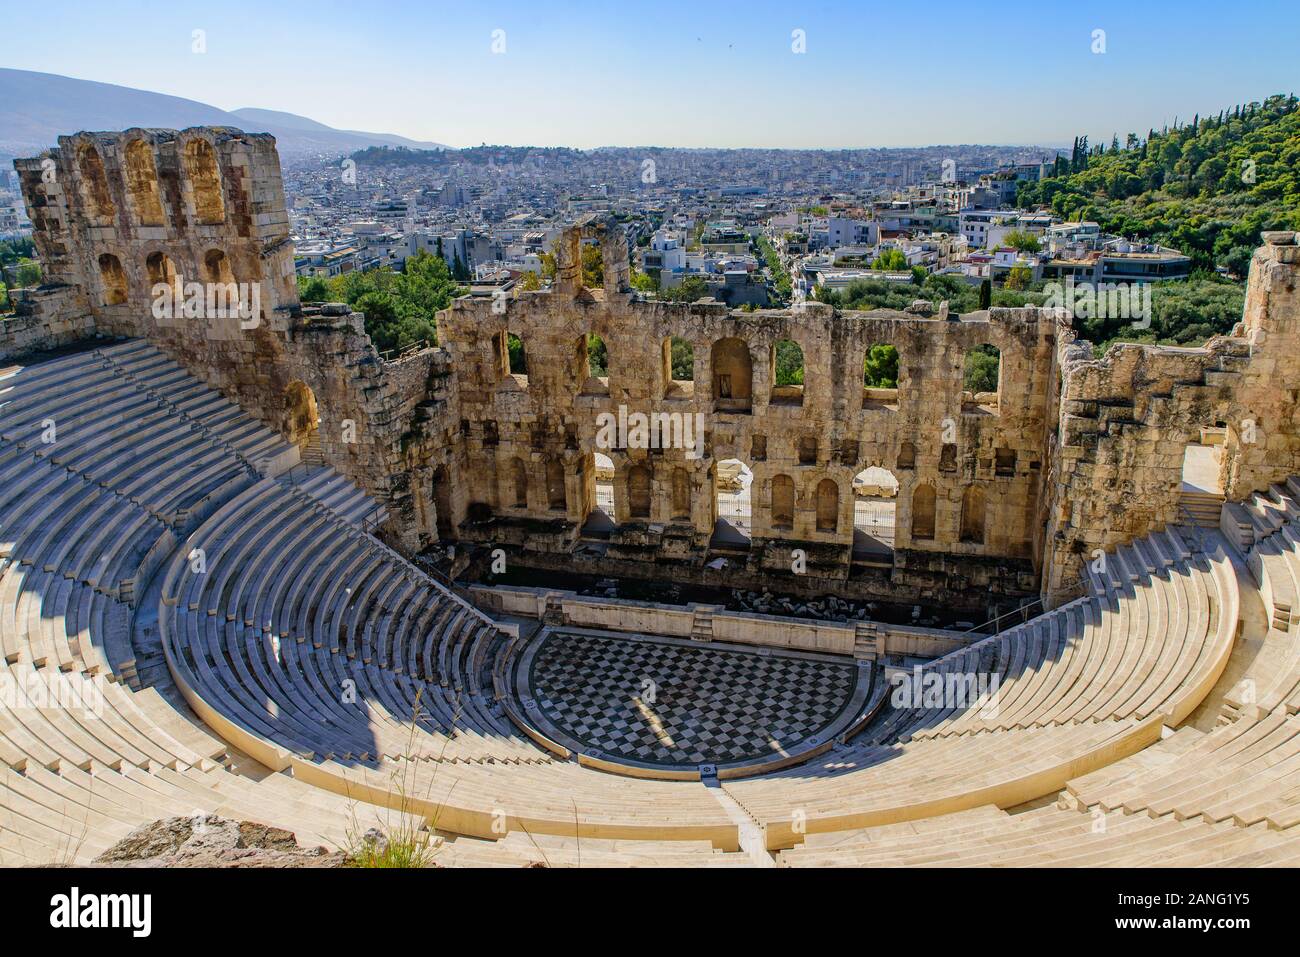 Odeon of Herodes Atticus, a Roman theater at Acropolis of Athens in Greece Stock Photo